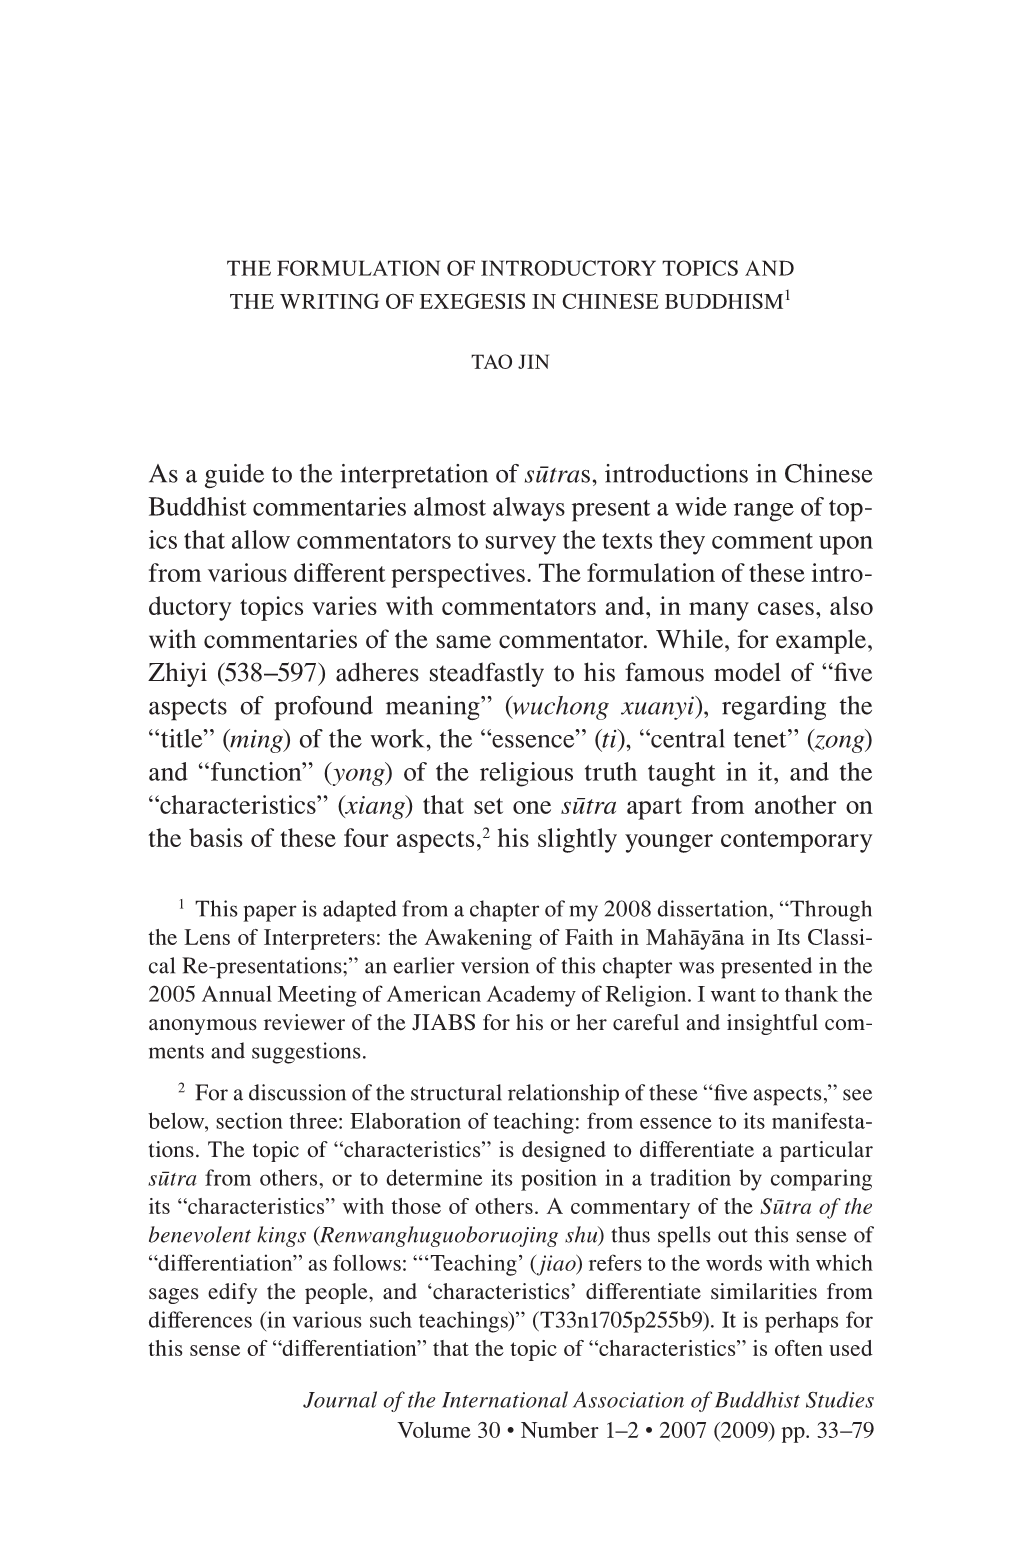 The Formulation of Introductory Topics and the Writing of Exegesis in Chinese Buddhism1